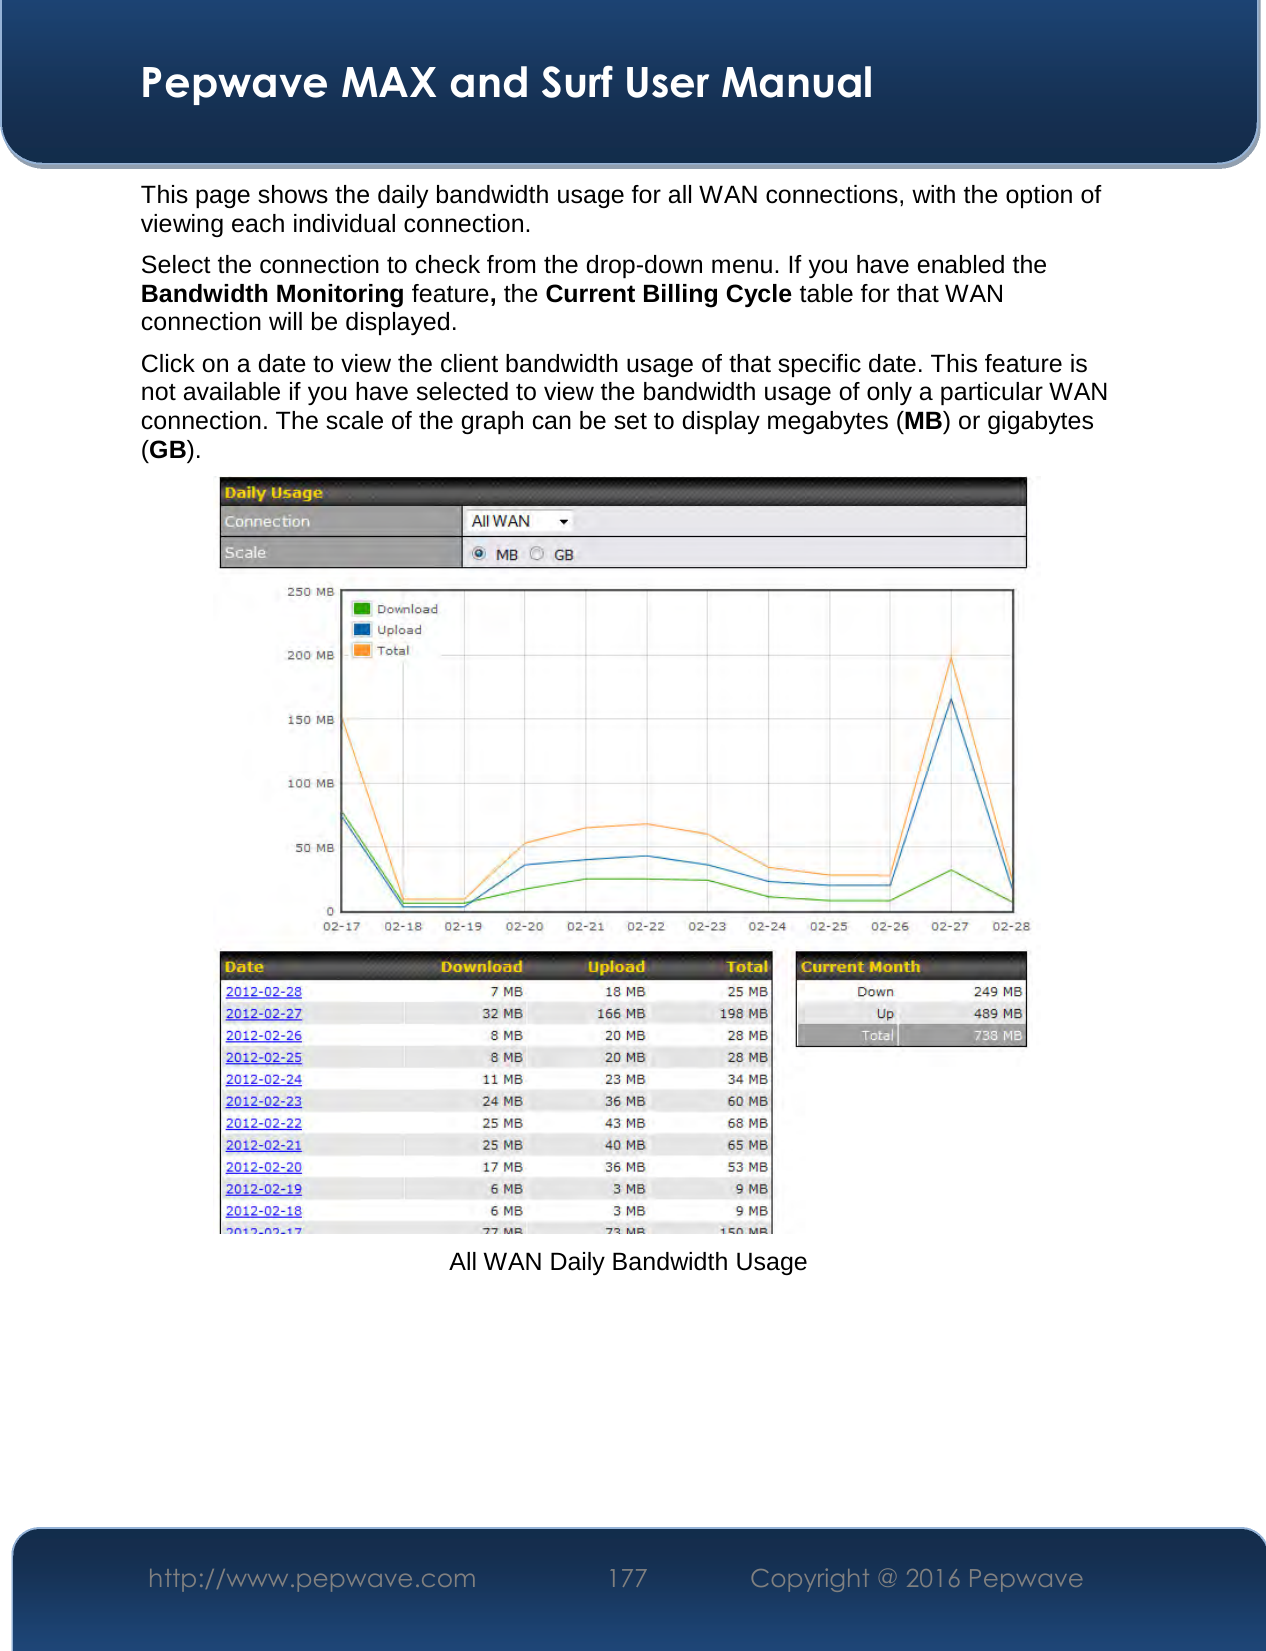  Pepwave MAX and Surf User Manual http://www.pepwave.com  177    Copyright @ 2016 Pepwave   This page shows the daily bandwidth usage for all WAN connections, with the option of viewing each individual connection.  Select the connection to check from the drop-down menu. If you have enabled the Bandwidth Monitoring feature, the Current Billing Cycle table for that WAN connection will be displayed. Click on a date to view the client bandwidth usage of that specific date. This feature is not available if you have selected to view the bandwidth usage of only a particular WAN connection. The scale of the graph can be set to display megabytes (MB) or gigabytes (GB).  All WAN Daily Bandwidth Usage    